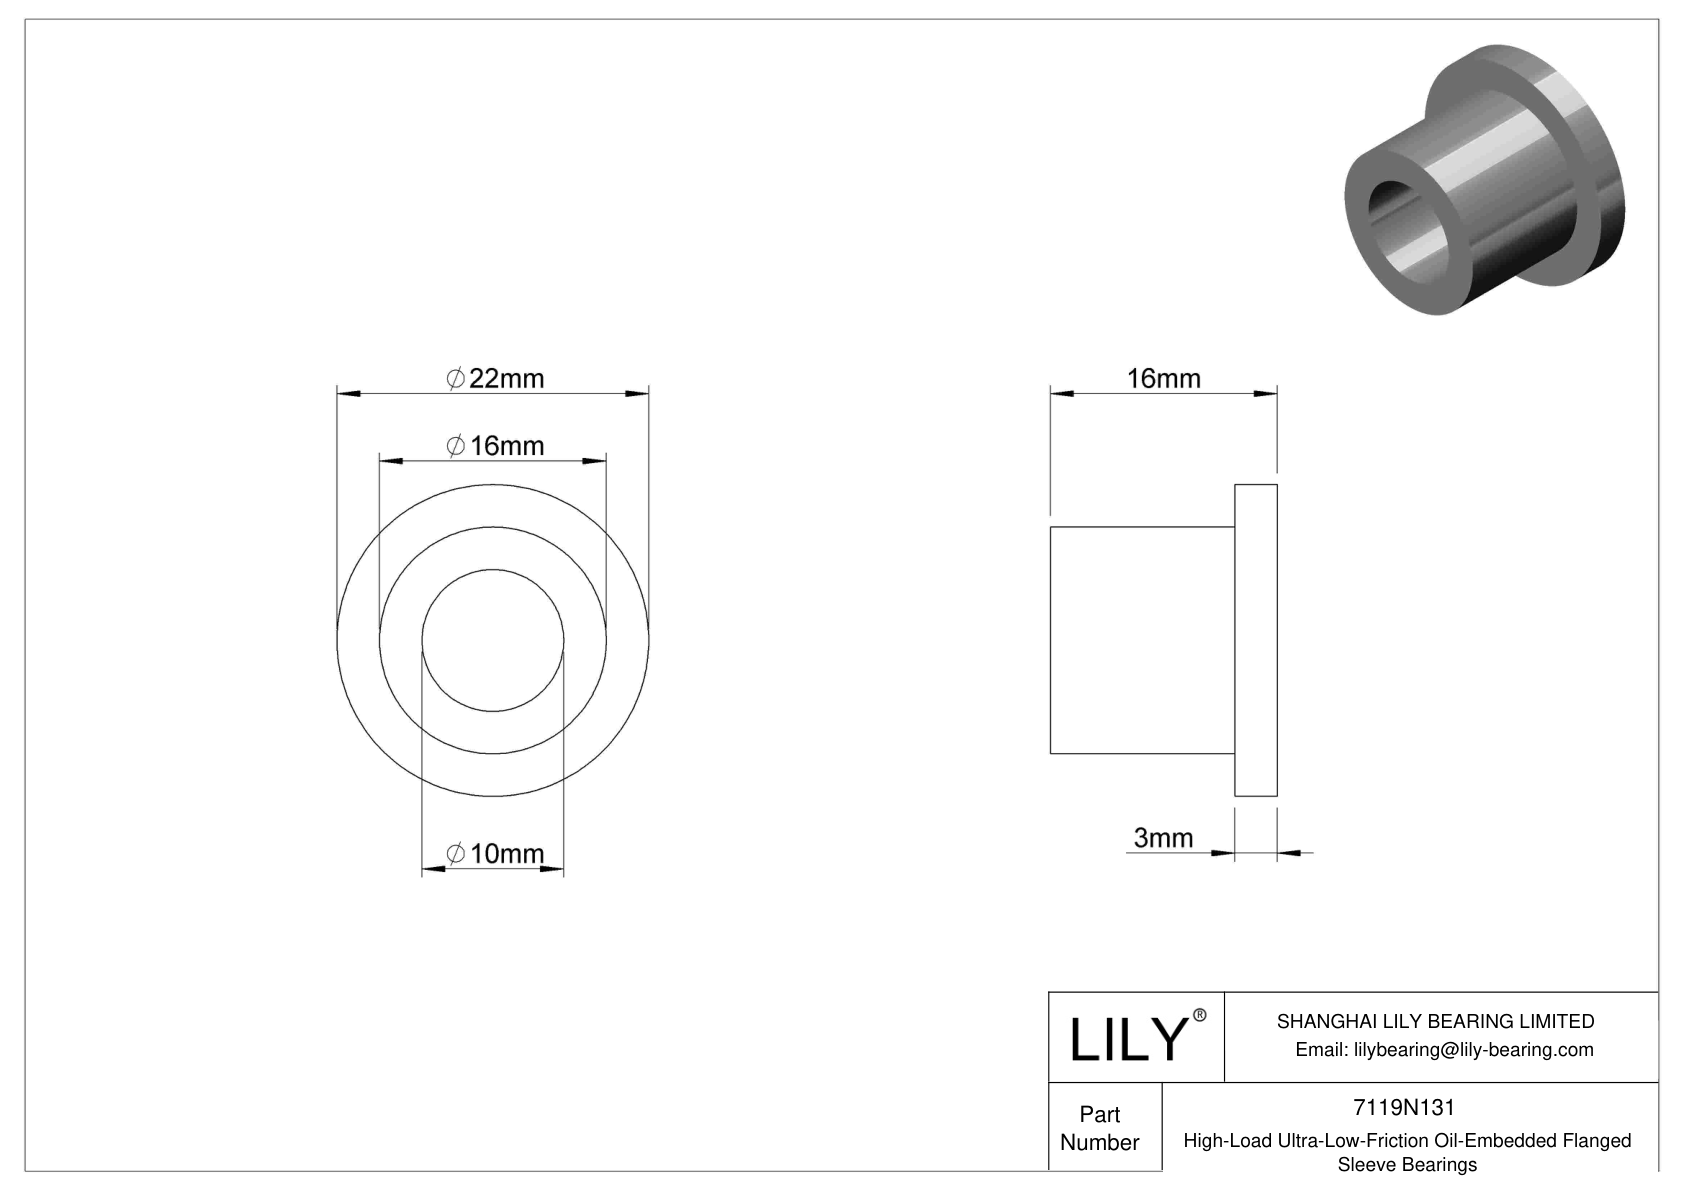 HBBJNBDB High-Load Ultra-Low-Friction Oil-Embedded Flanged Sleeve Bearings cad drawing